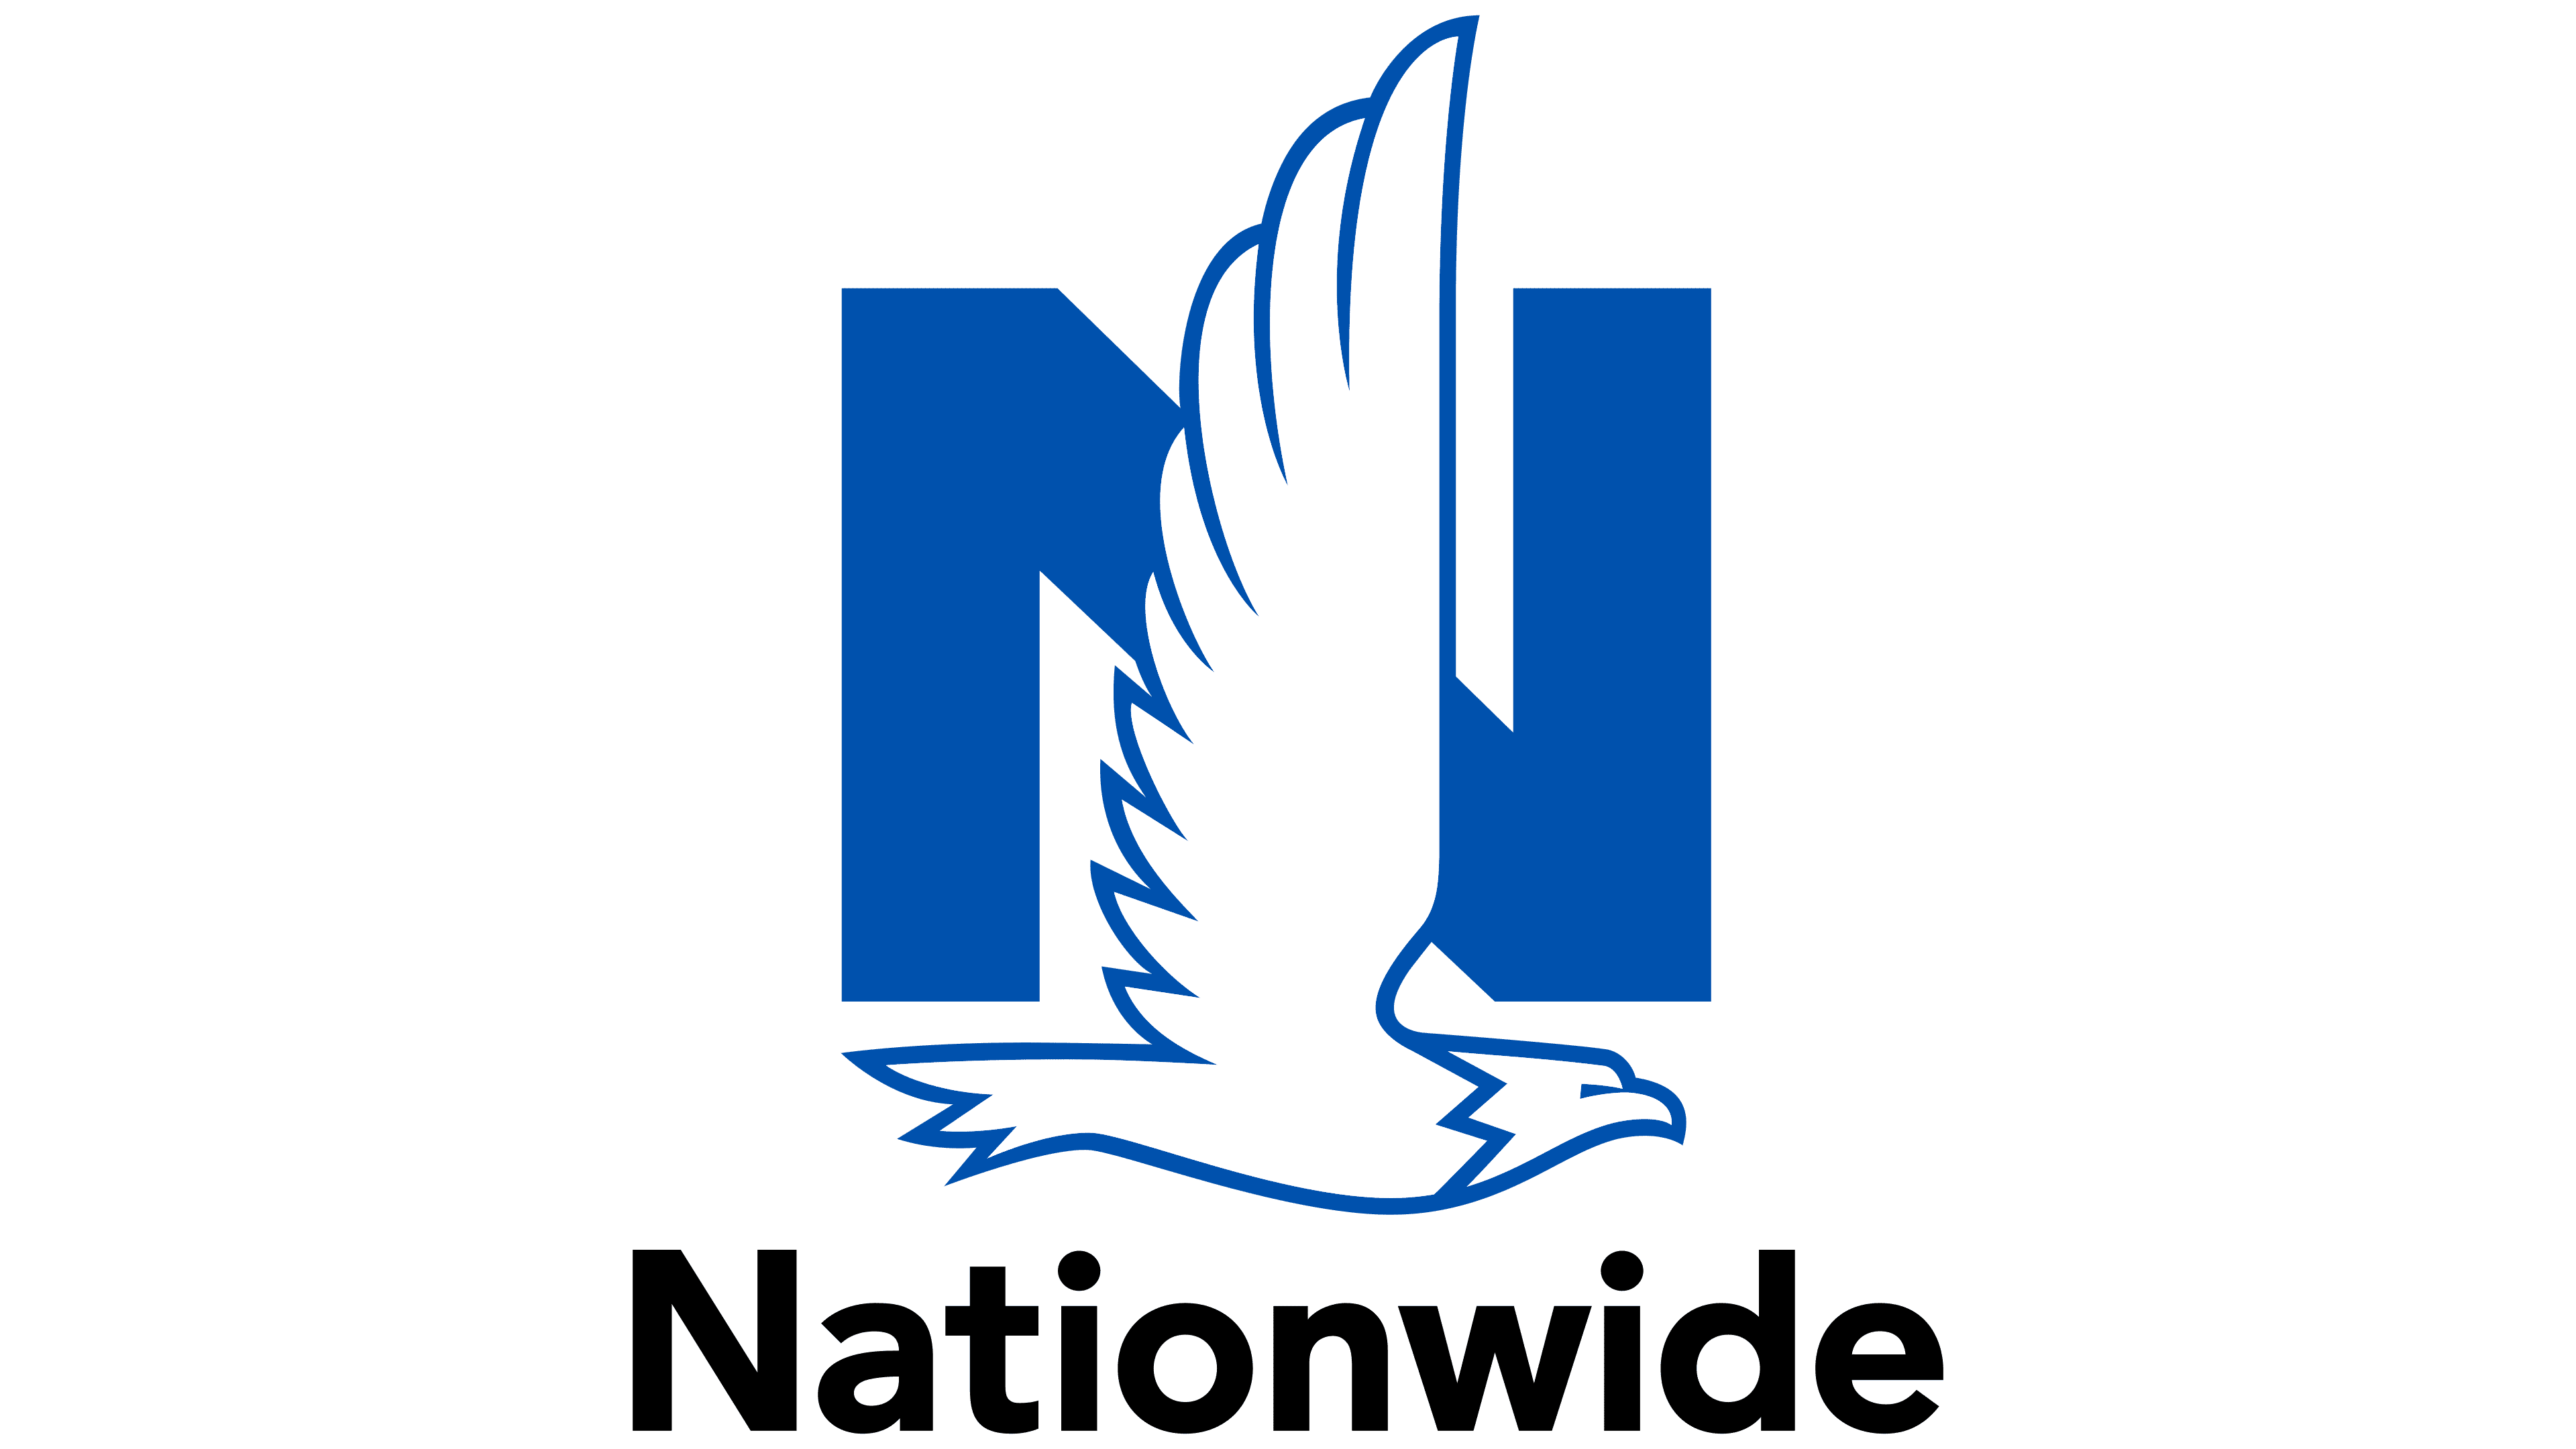 eagle nationwide is on your side